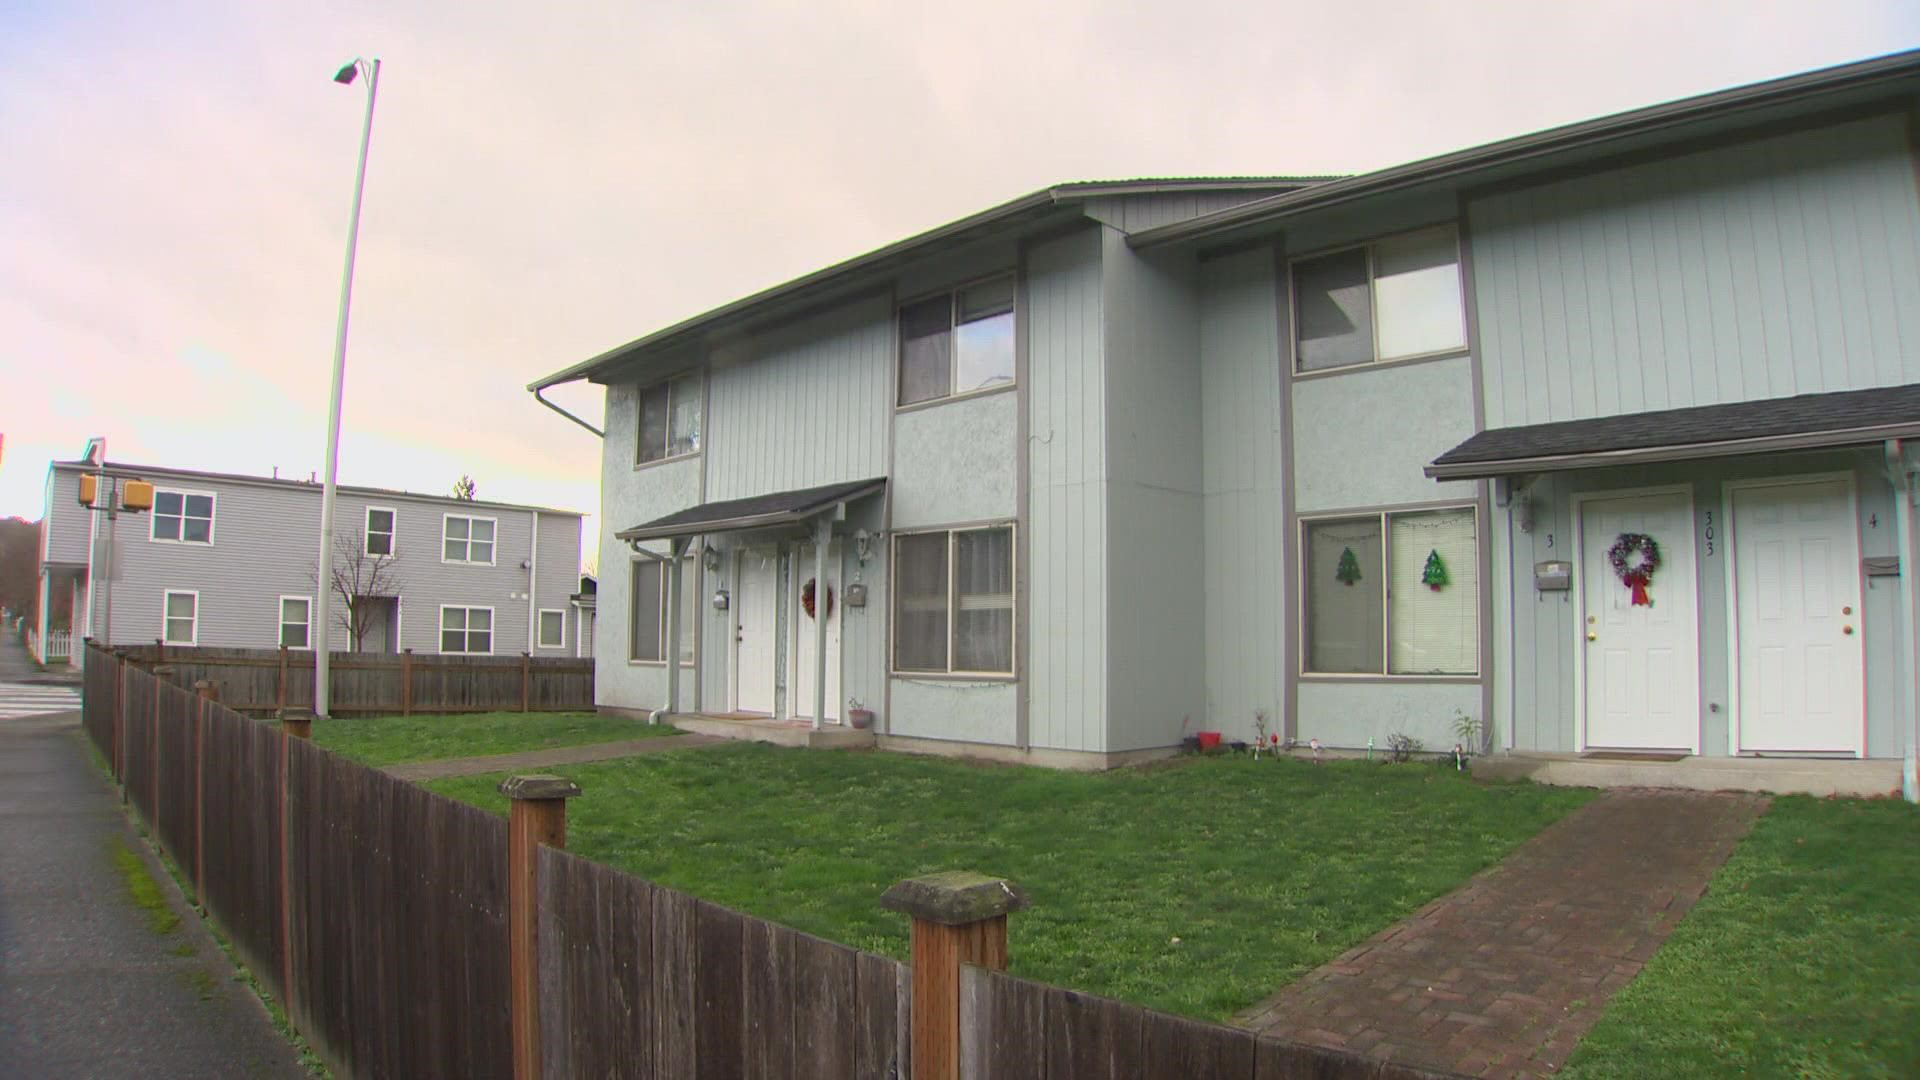 There were no signs of a struggle, trauma or foul play, according to Renton Police. A medical examiner is investigating to determine cause of death.